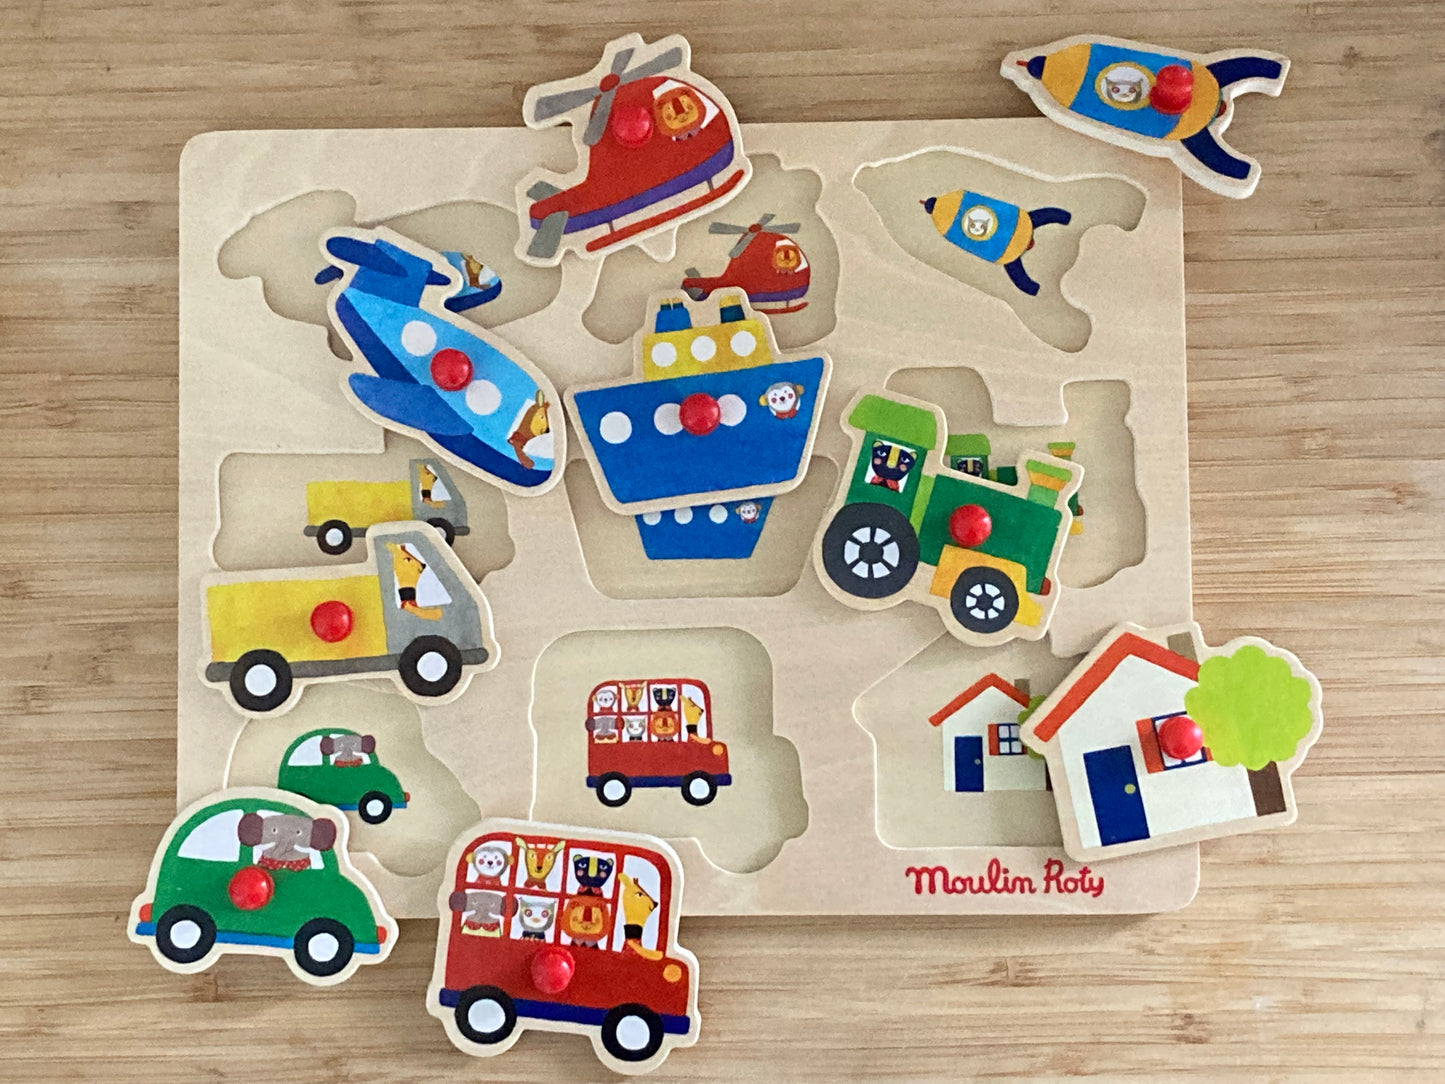 Wooden Toy, Baby - "WAY-TO-TRAVEL" FIRST PUZZLE